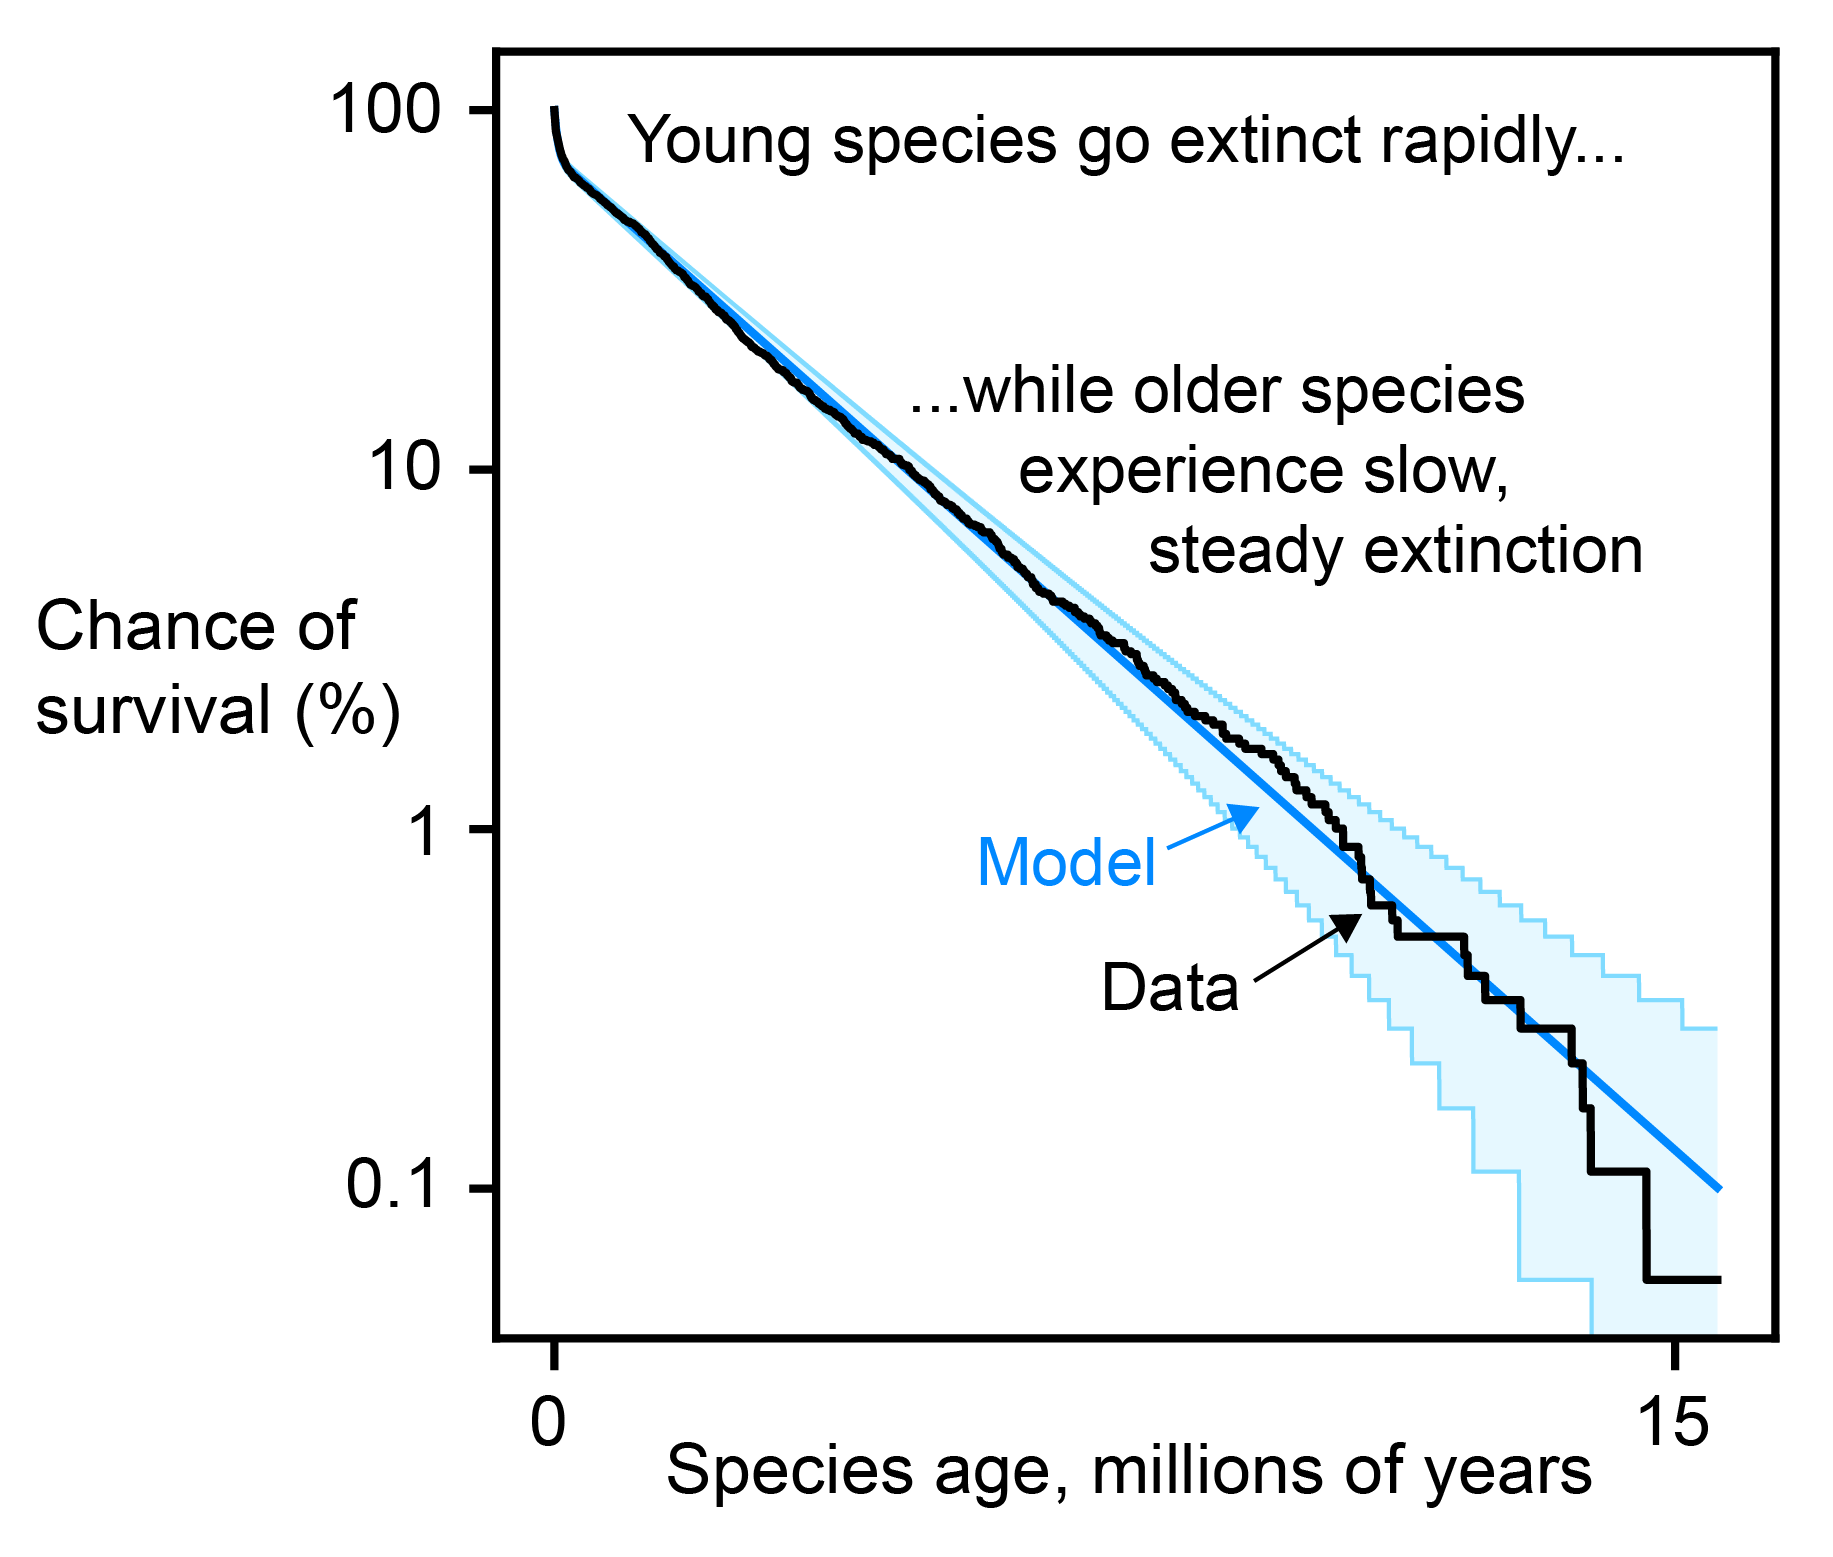  Chart showing younger species are generally at greater risk of extinction.